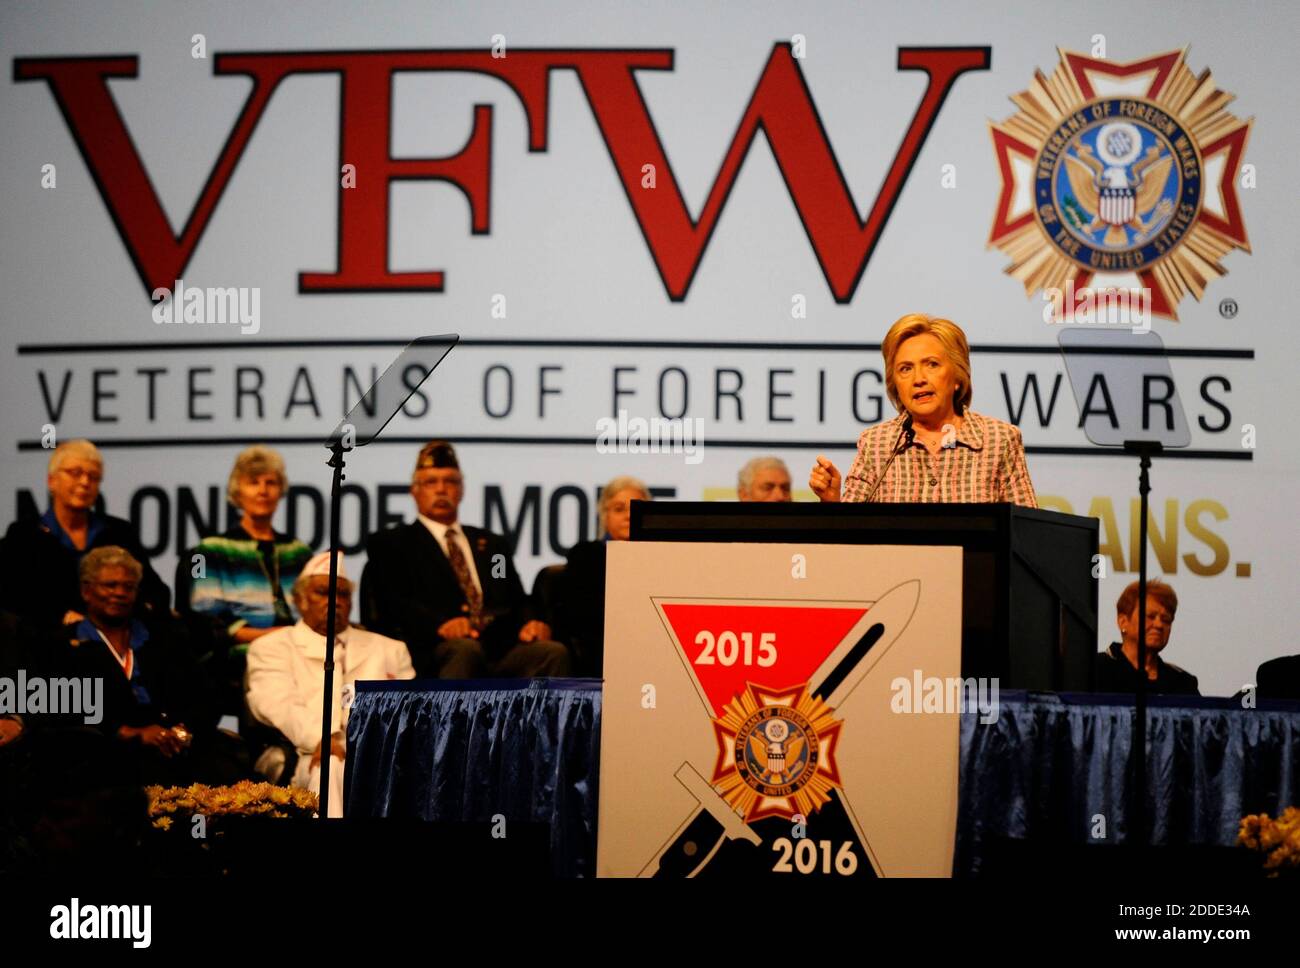 NO FILM, NO VIDEO, NO TV, NO DOCUMENTARY - Hillary Clinton, the presumptive Democratic presidential nominee, addresses the 117th annual VFW National Convention at the Charlotte Convention center on Monday, July 25, 2016 in Charlotte, NC, USA. Photo by David T. Foster III/Charlotte Observer/TNS/ABACAPRESS.COM Stock Photo